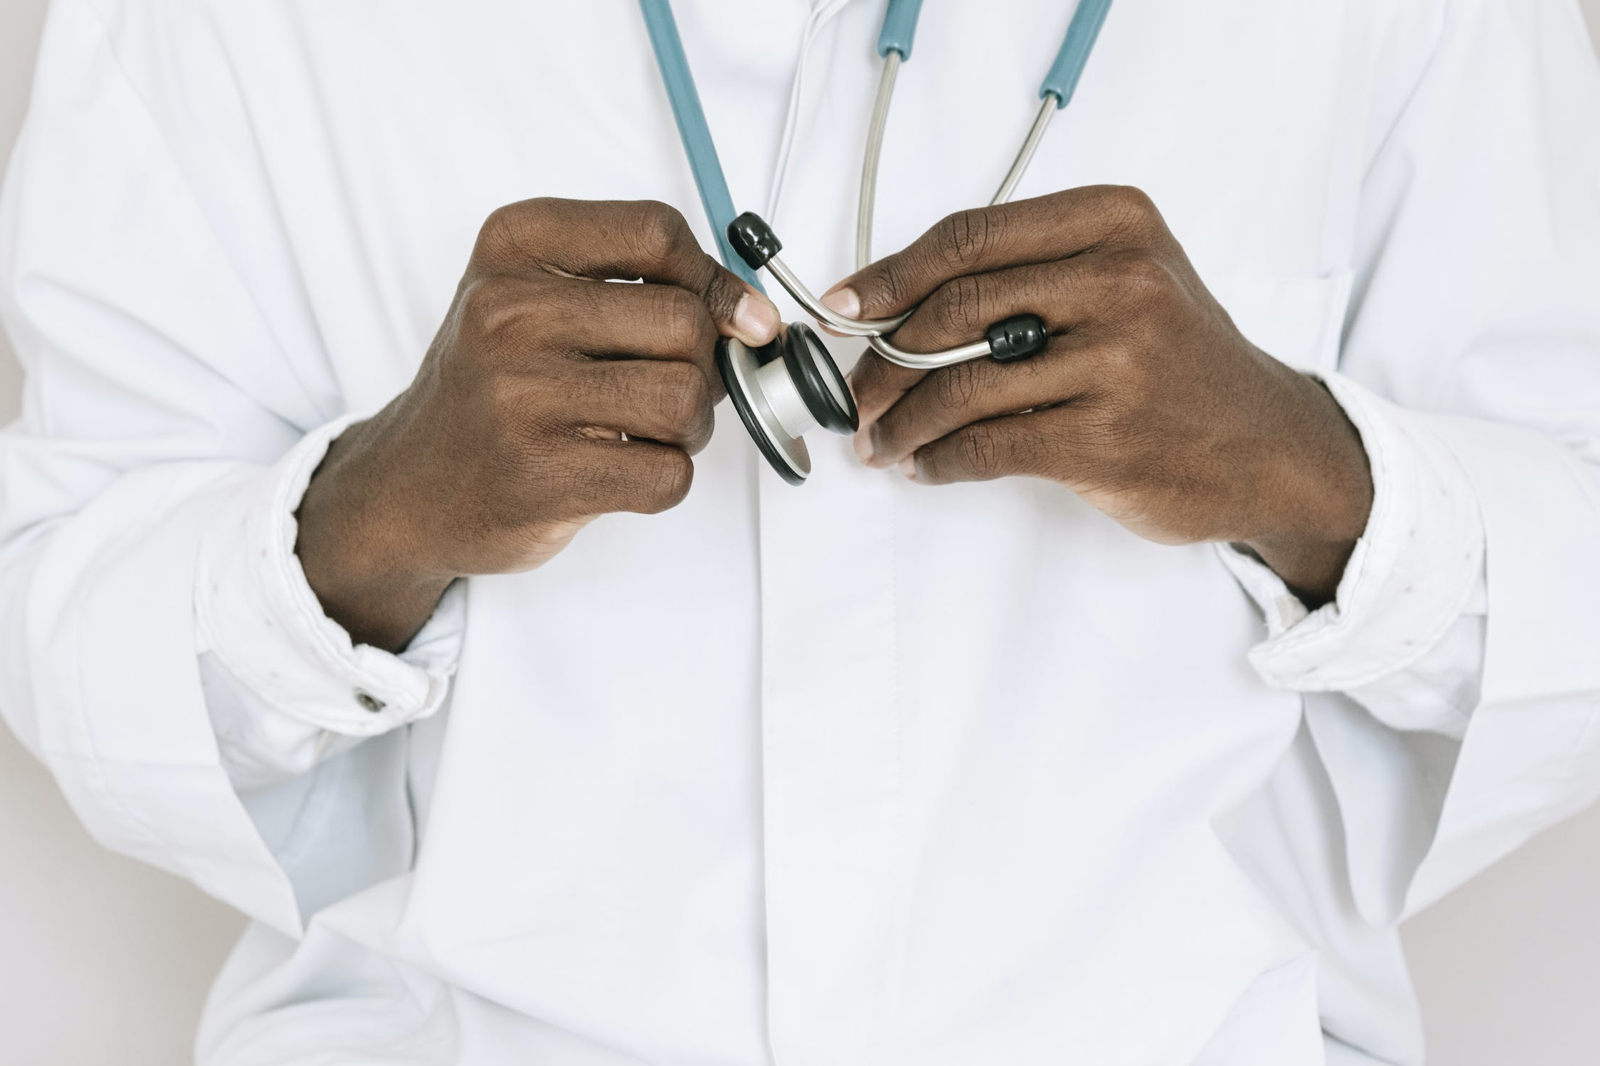 A doctor in a white coat grips a stethoscope in both hands in front of him. The photo is taken from the neck to hips.